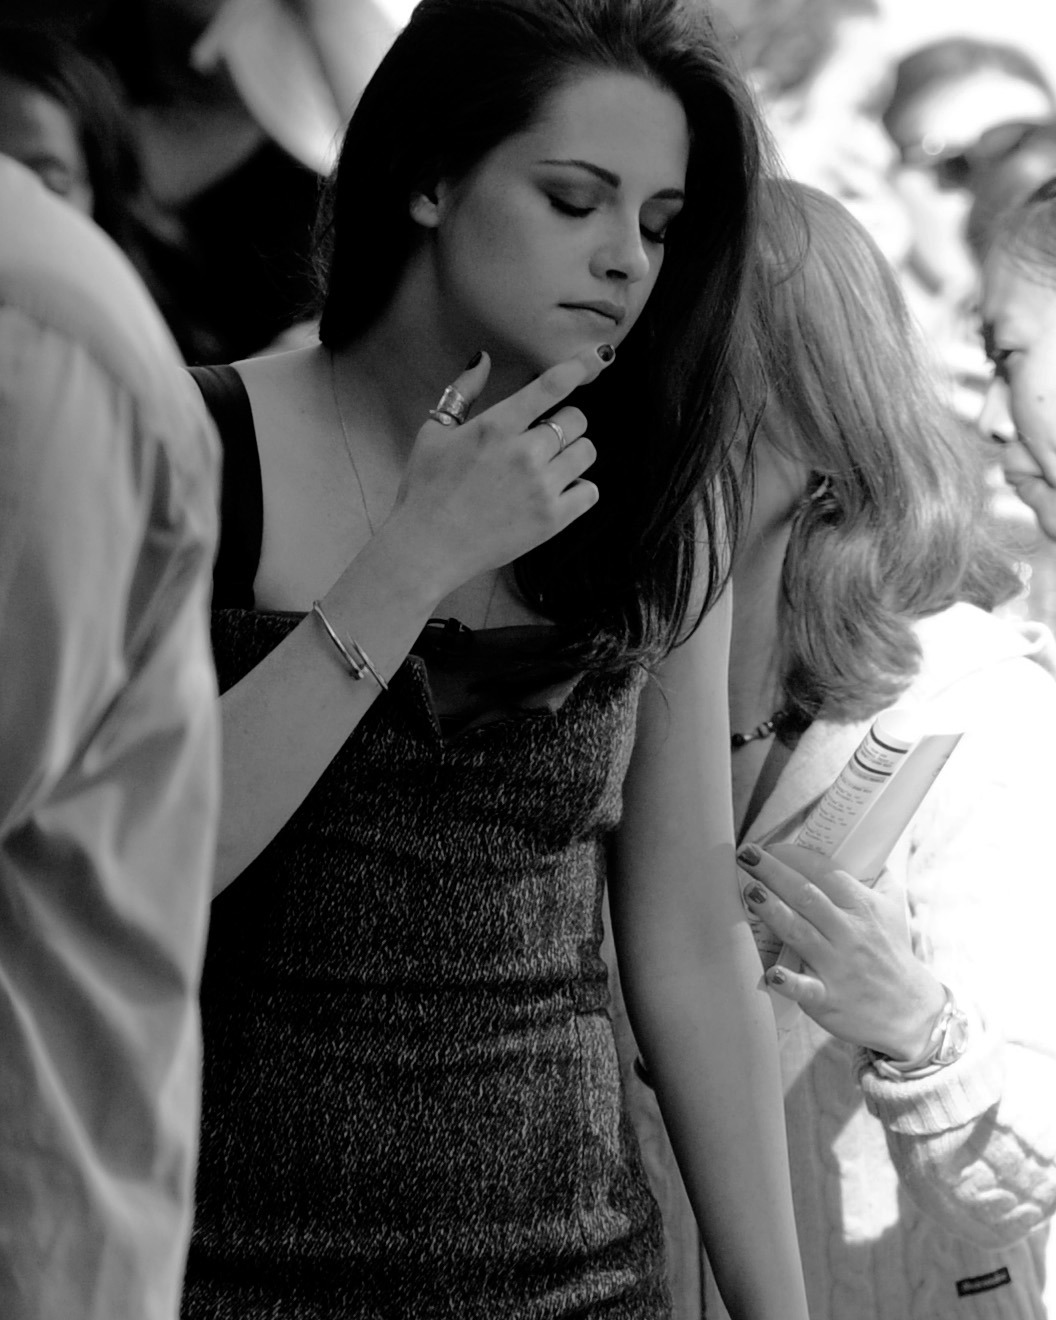 Kristen Stewart on “The Today Show”, New York City, may 31, 2012